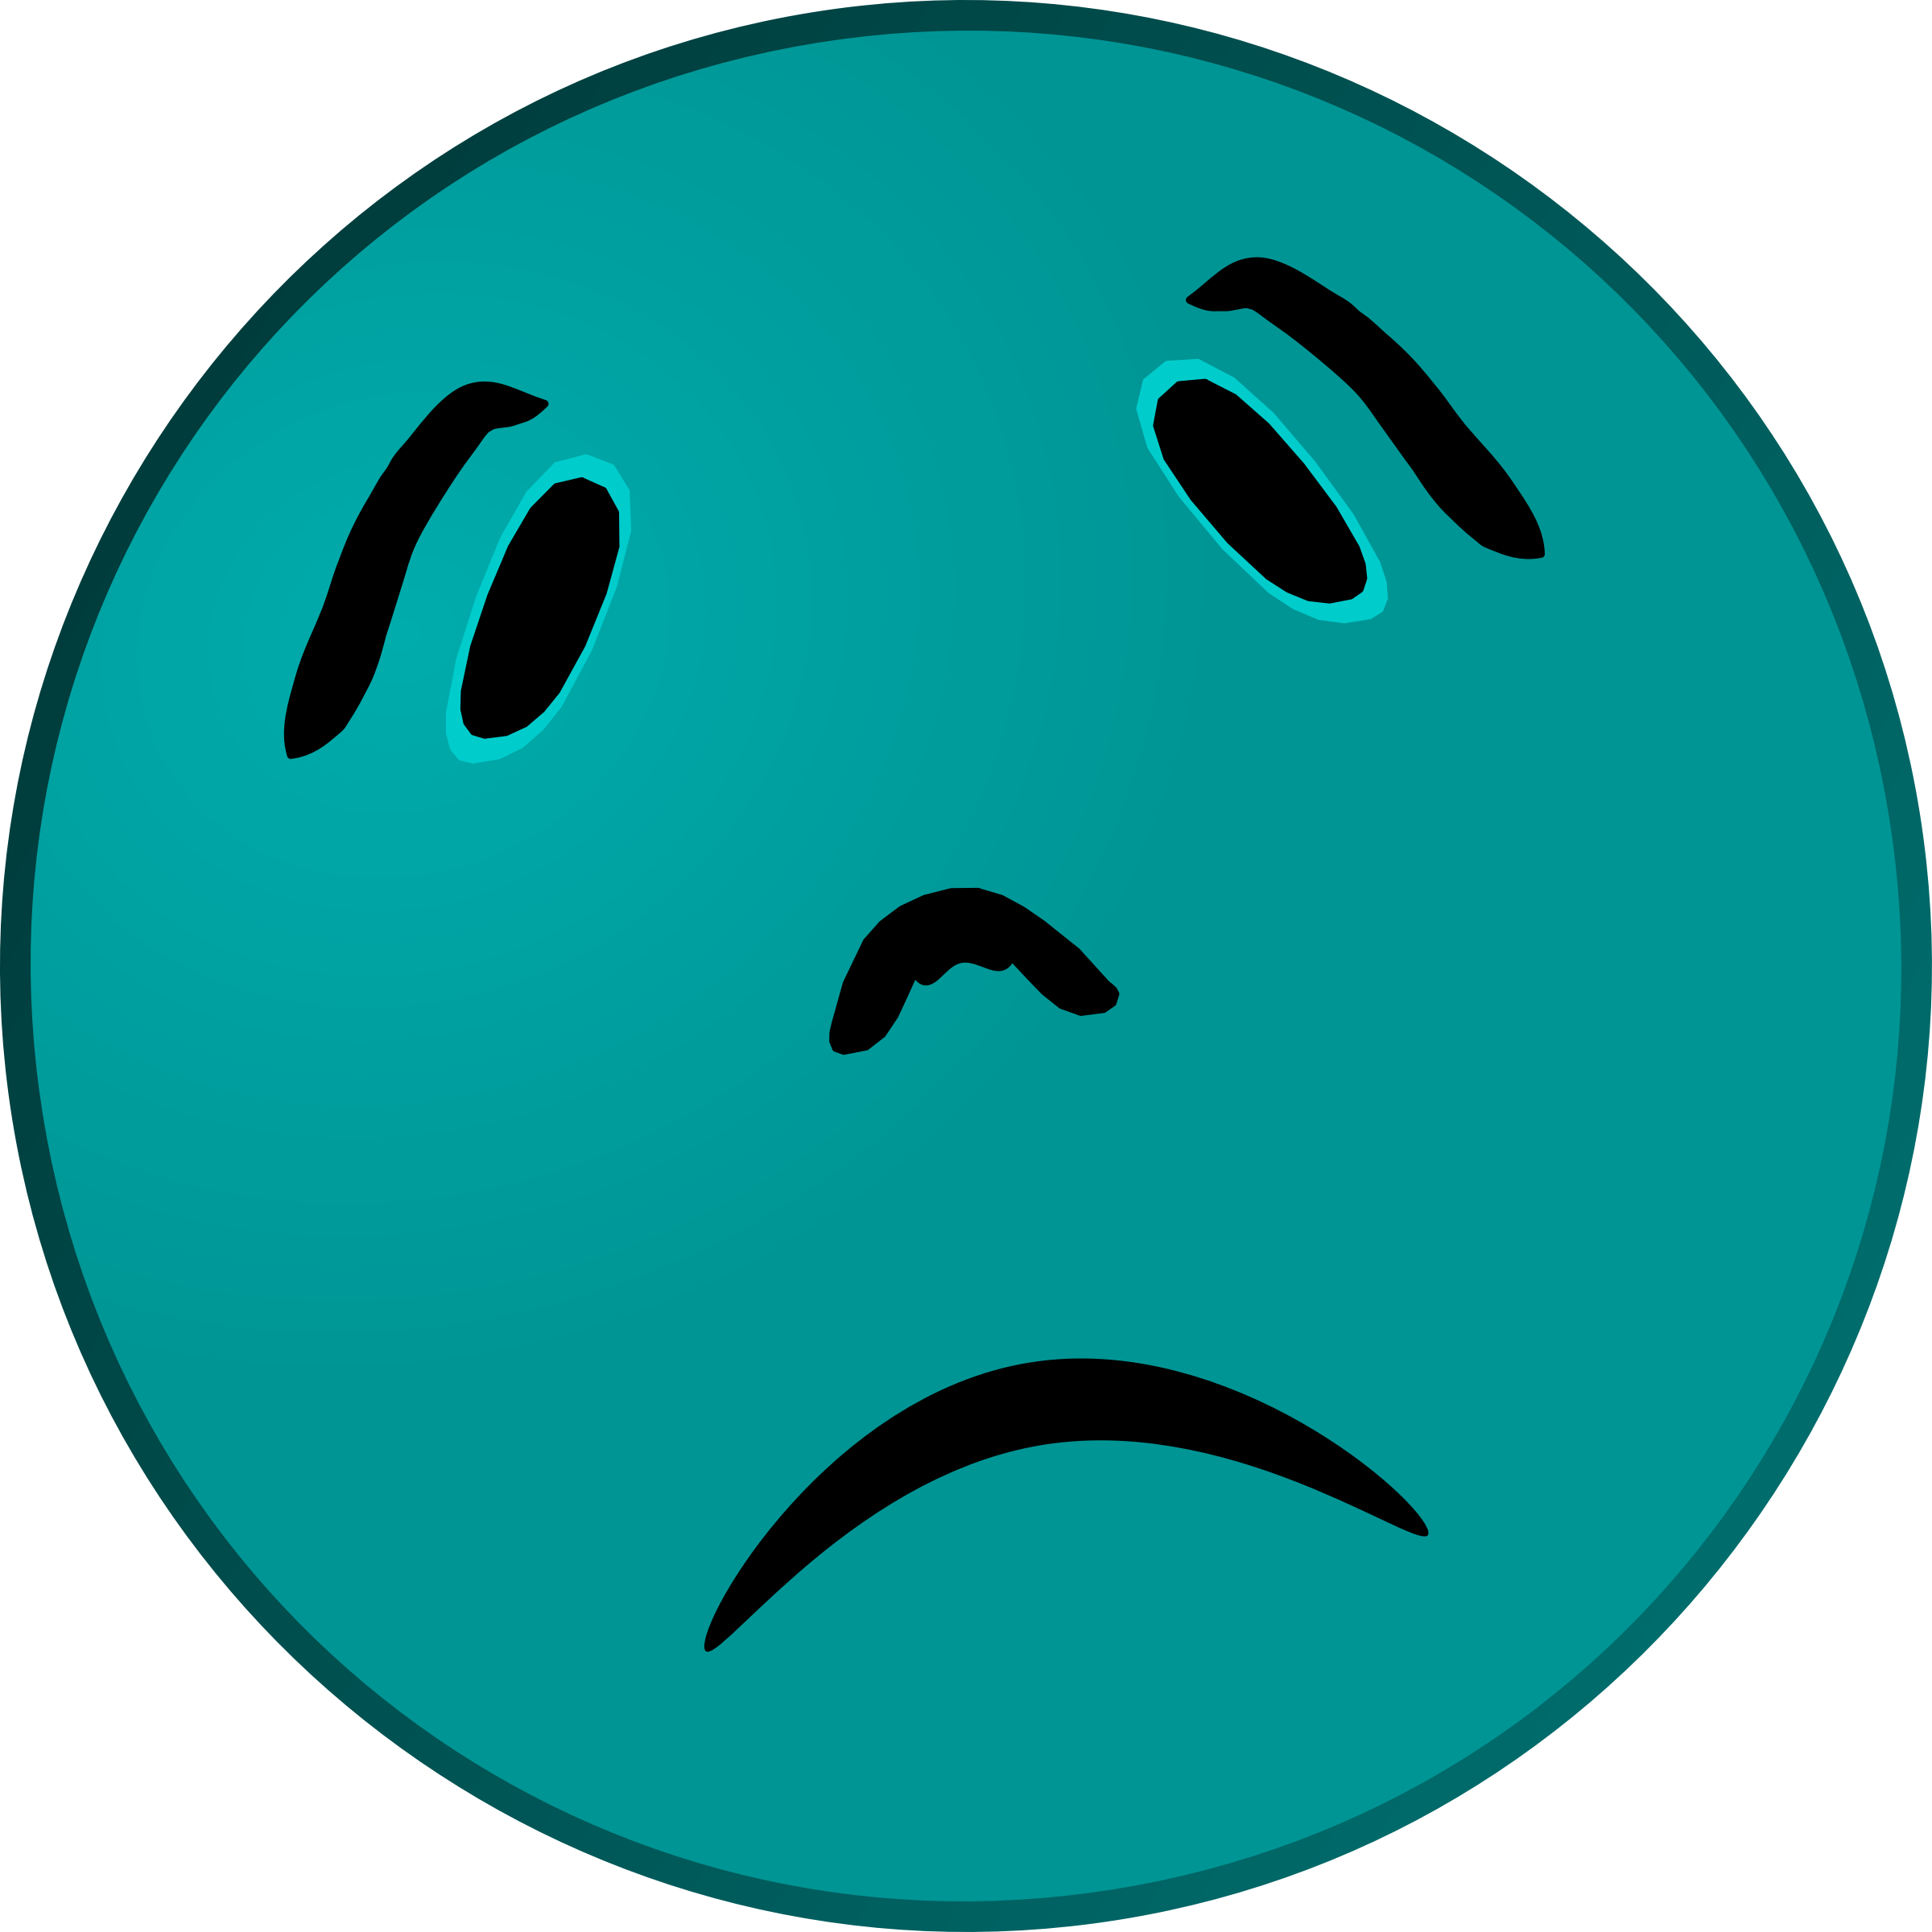 Free Frowning Smiley Face, Download Free Clip Art, Free Clip Art on